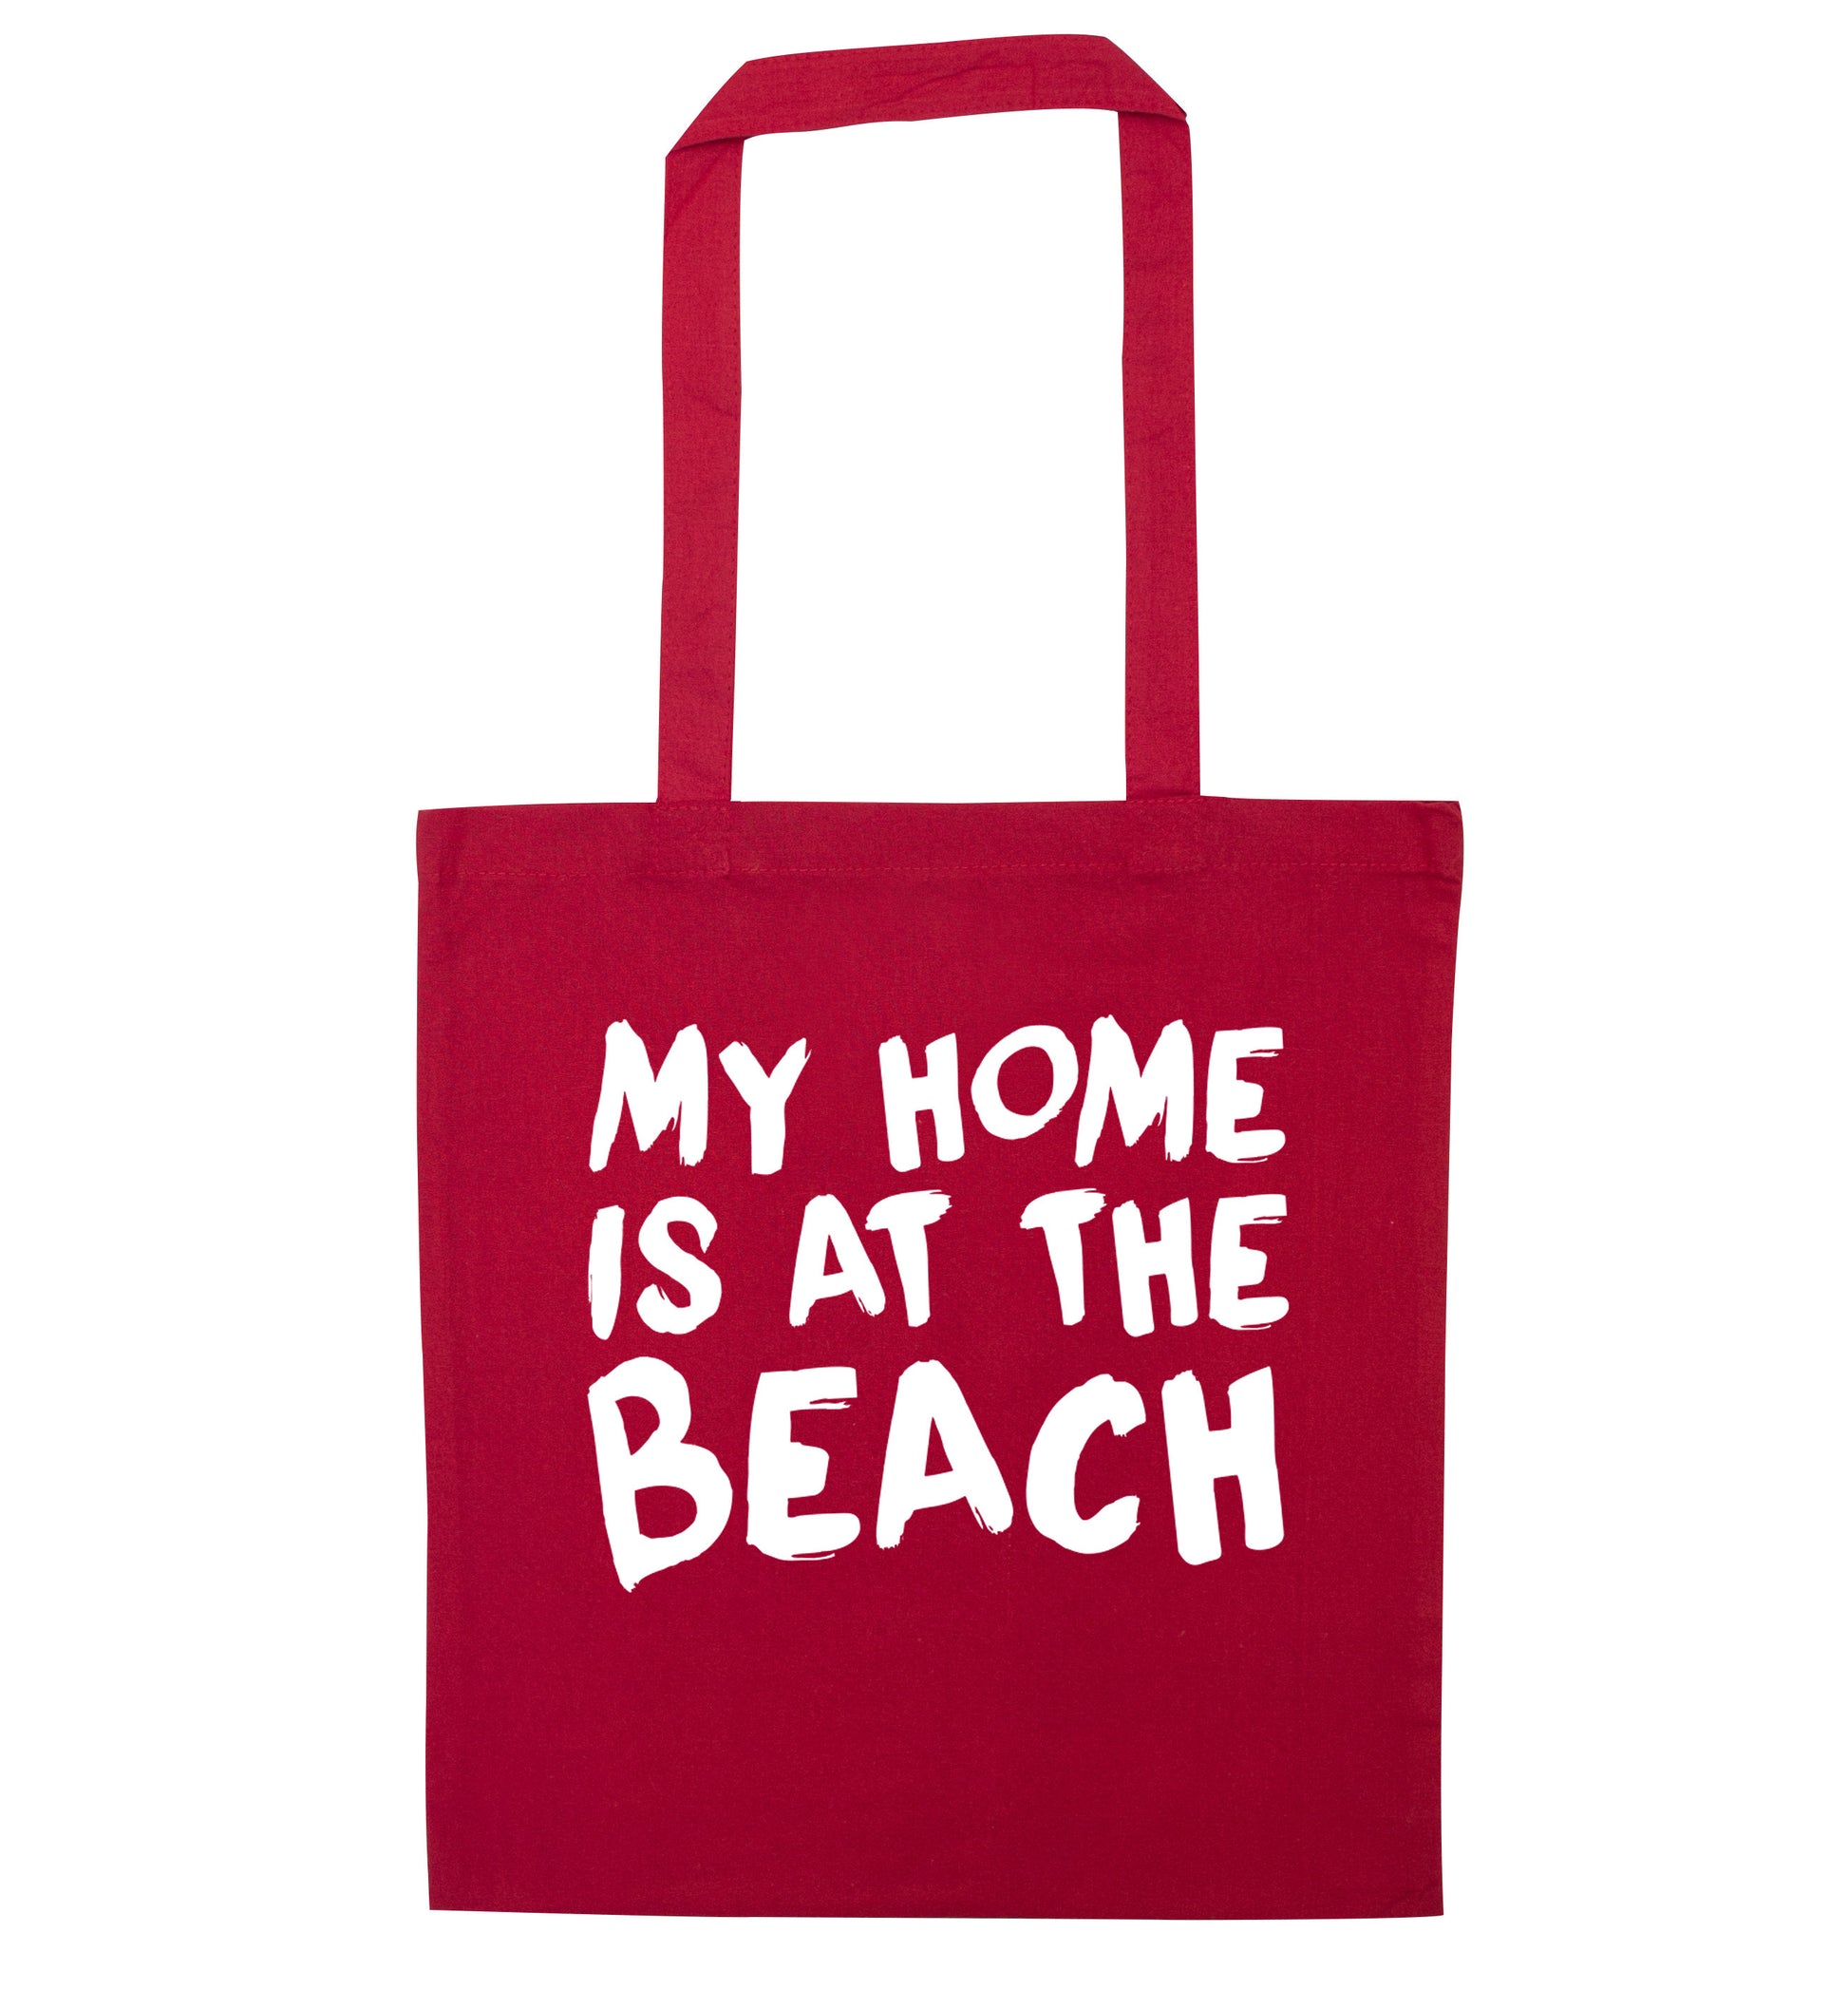 My home is at the beach red tote bag